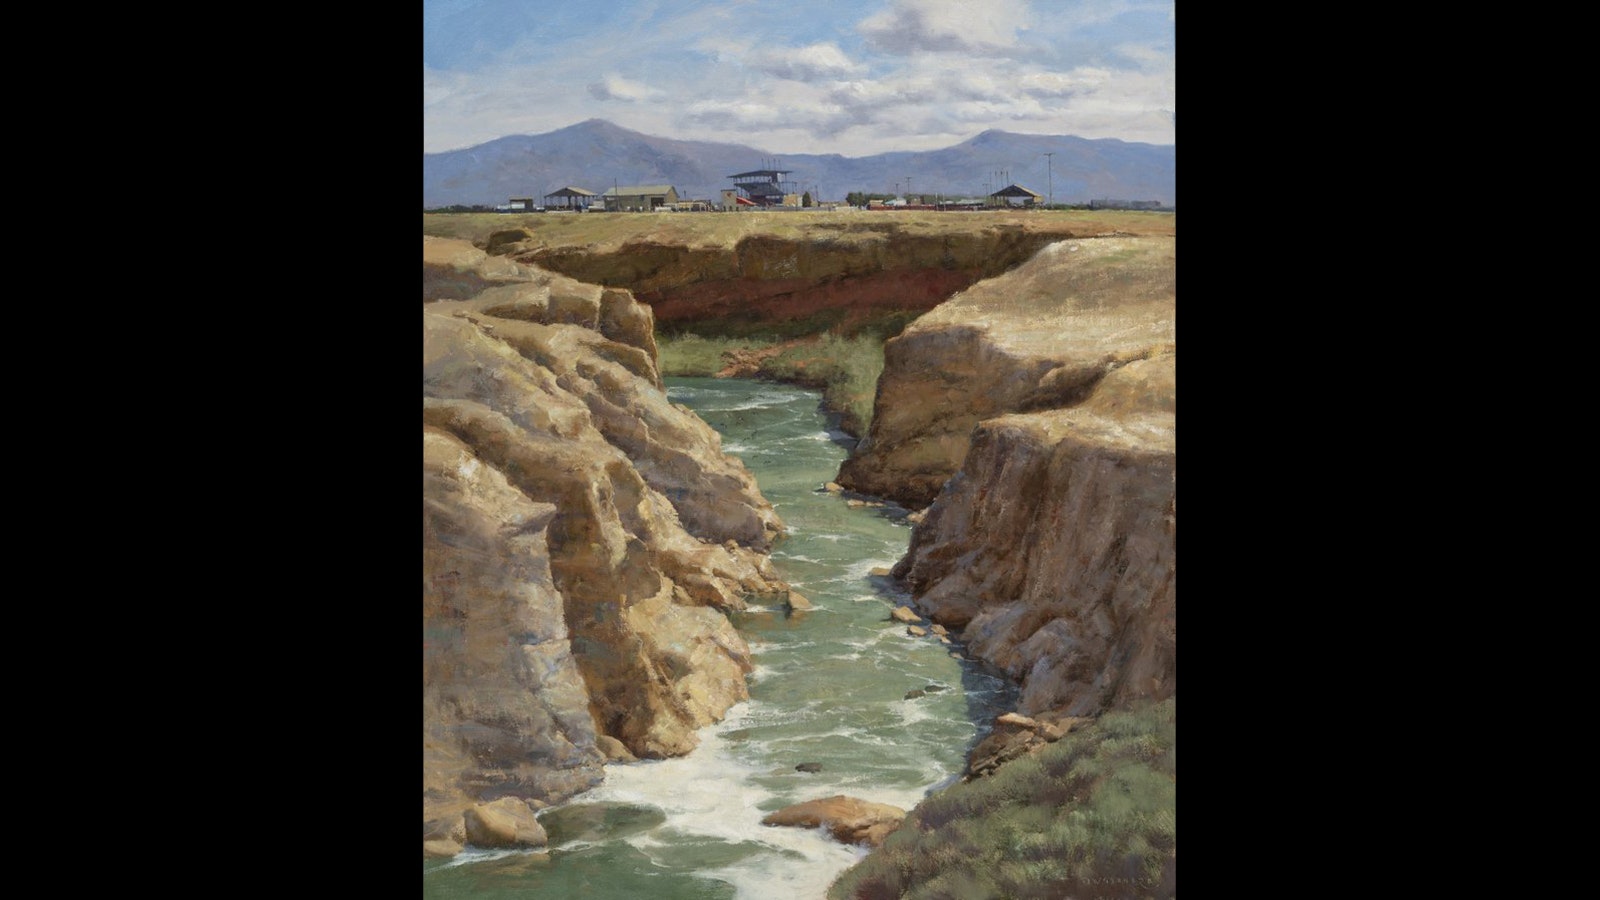 The River and the Rodeo, Cody" by Donald Demers